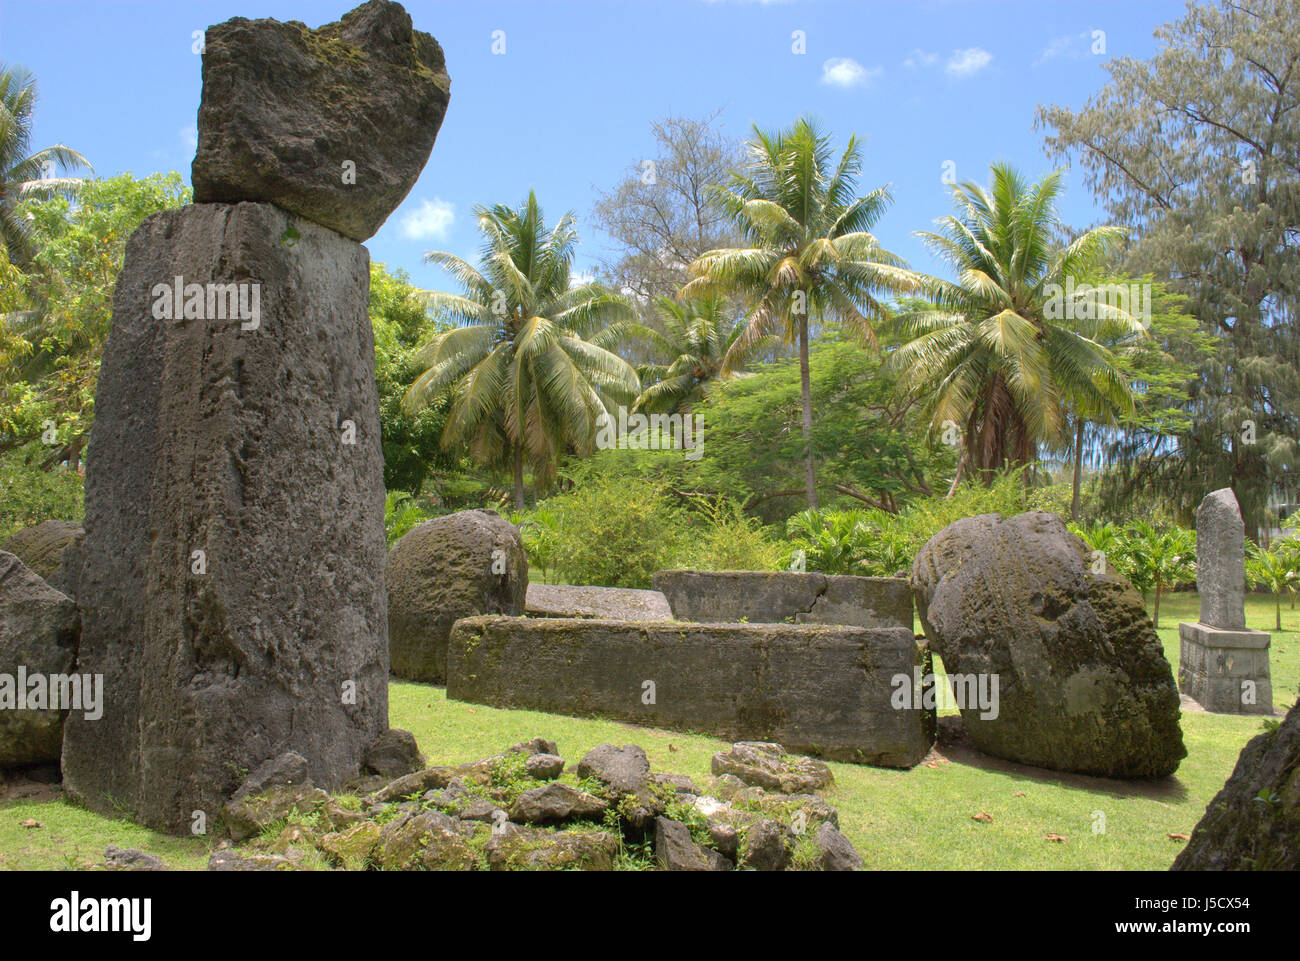 House of Taga, An archeological site named after a mythological chief Taga. It is located in San Jose village, Tinian, Northern Mariana Islands. Stock Photo